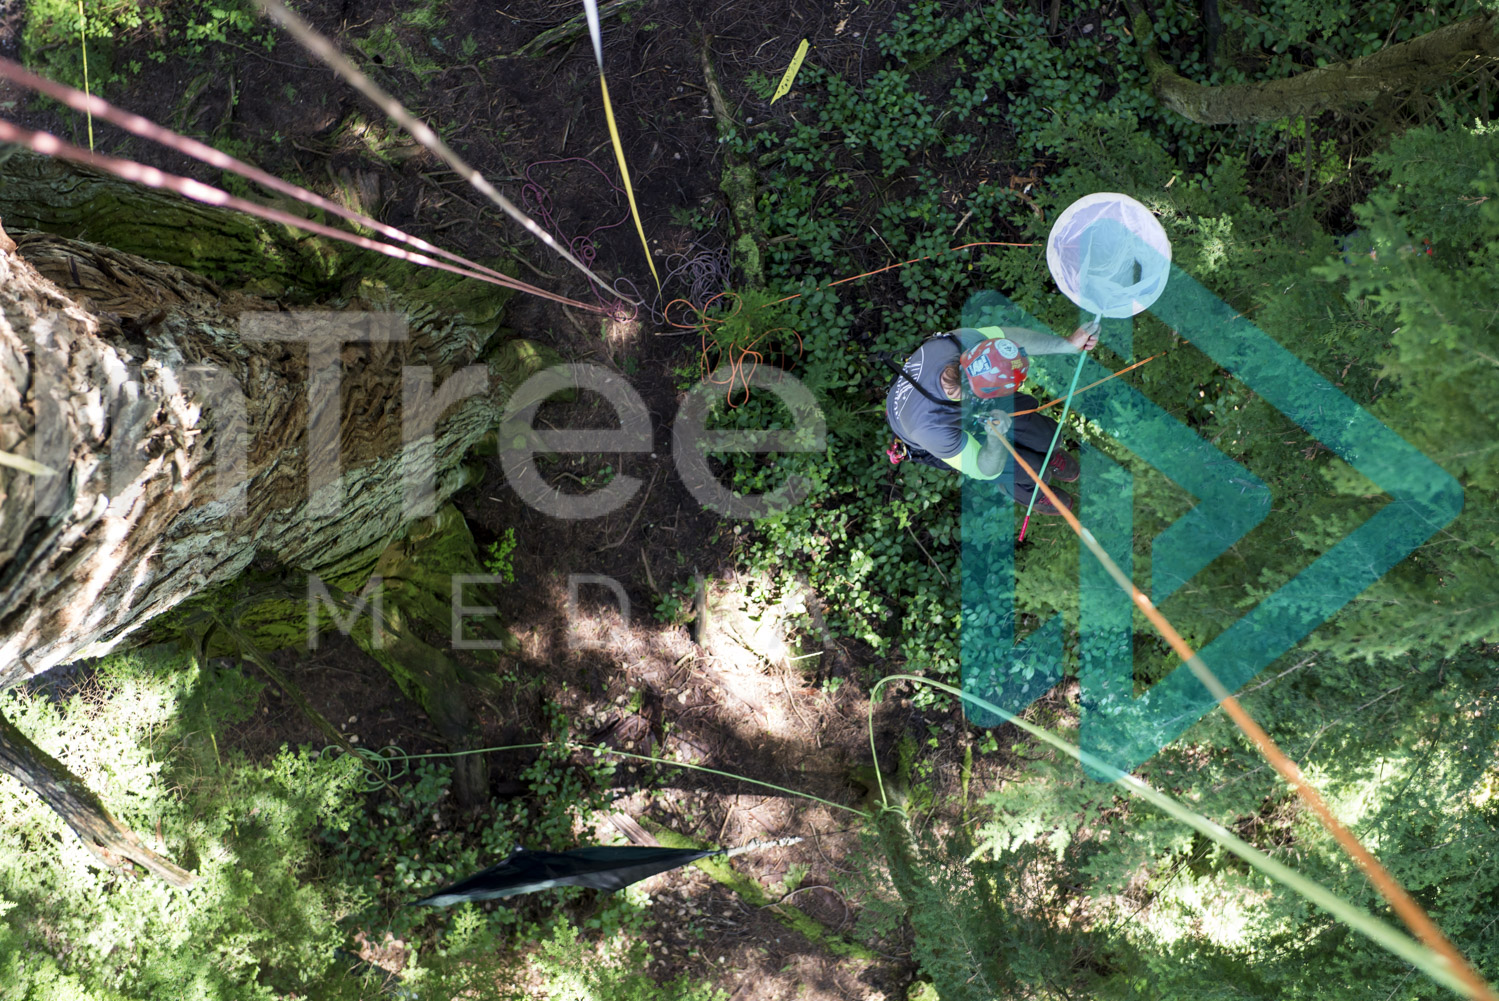 Climbing arborist suspended on rope in mid air with net carrying out canopy research - Arborist Stock Photo 001-21-6877